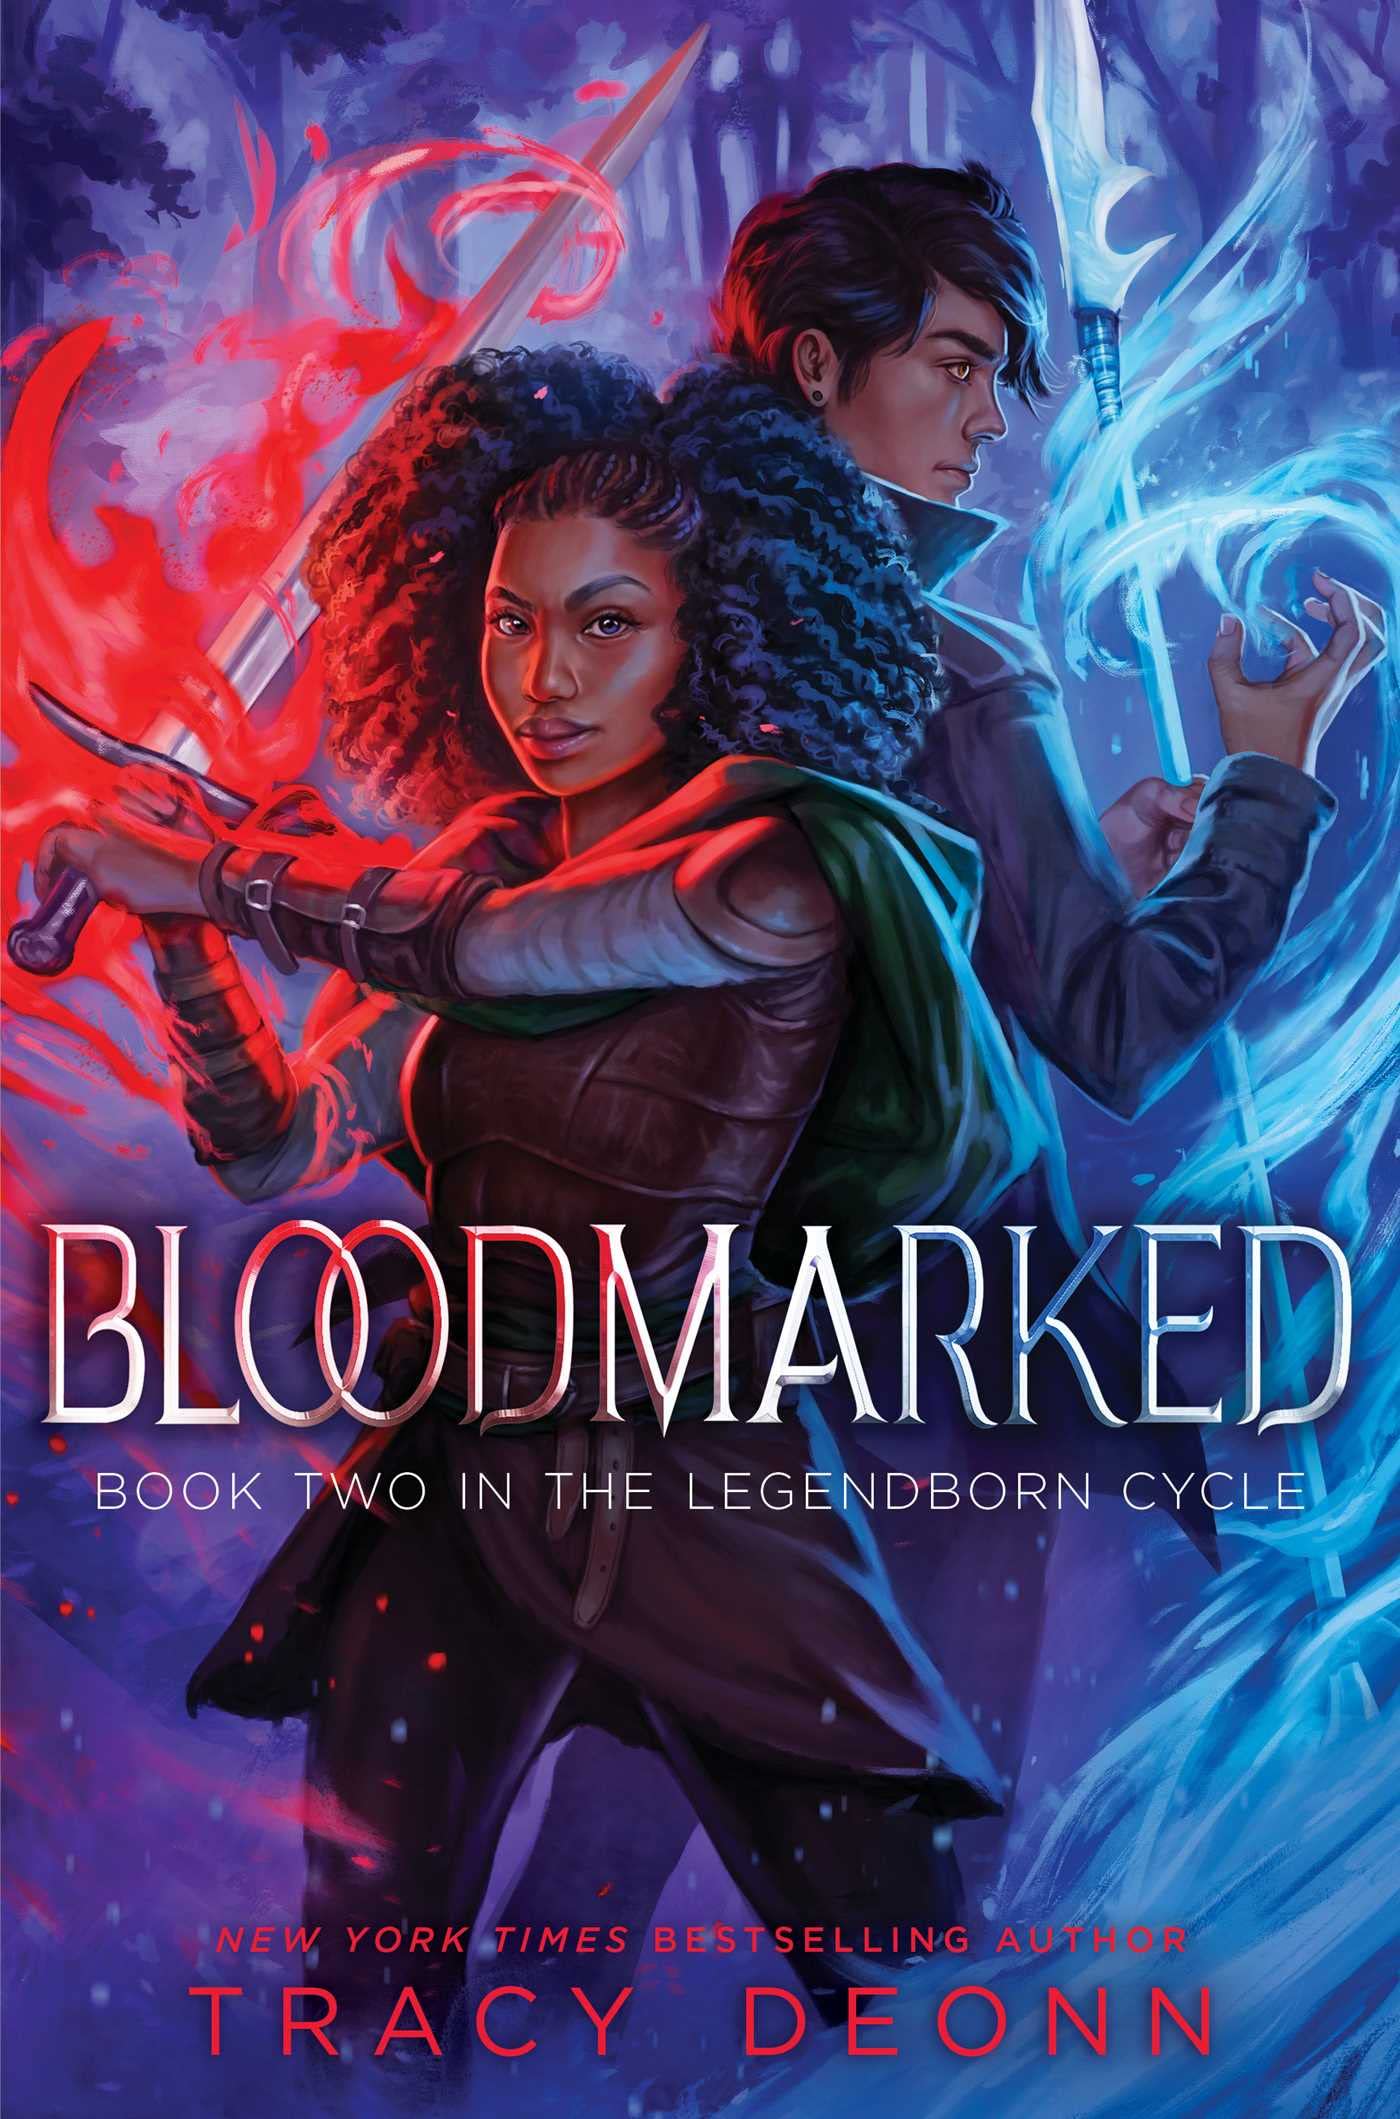 Bloodmarked: Release Date Of The Most Awaited Sequel